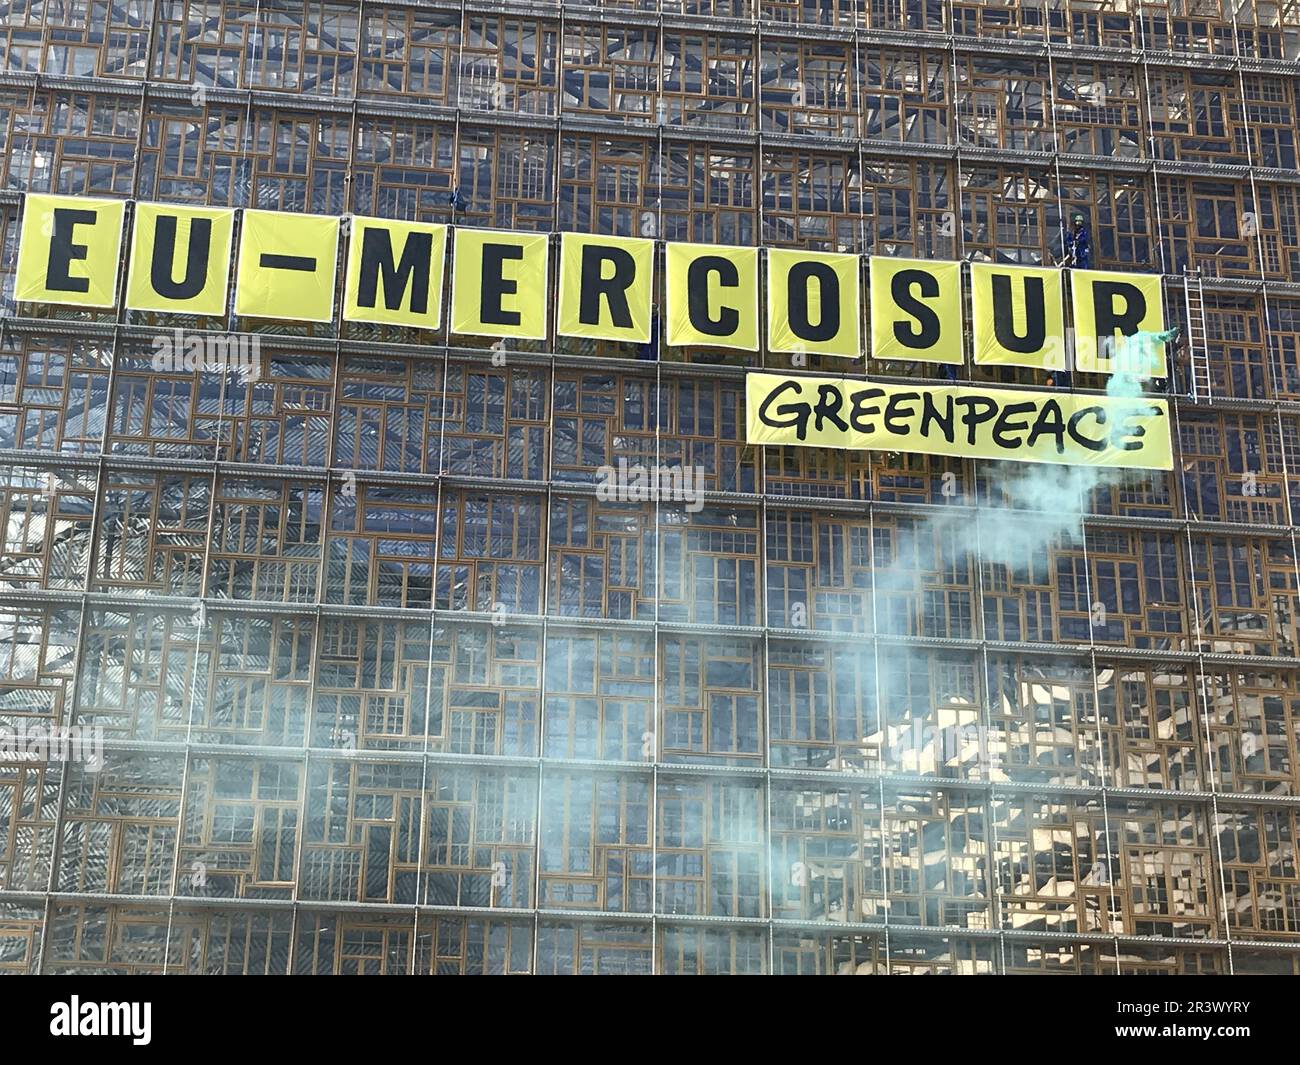 Illustration picture shows a banner saying 'Stop EU-Mercosur' during a protest action of Greenpeace environmental activists at the European Council building, Thursday 25 May 2023, in Brussels. Greenpeace activists gathered to protest against the proposed trade agreement between the EU and four South American Mercosur countries (Argentina, Brazil, Paraguay and Uruguay). For the NGO, the text conflicts with the European Green Deal. Greenpeace is particularly concerned about the different sanitary standards between the partners, especially concerning European pesticides, some of which are banned Stock Photo